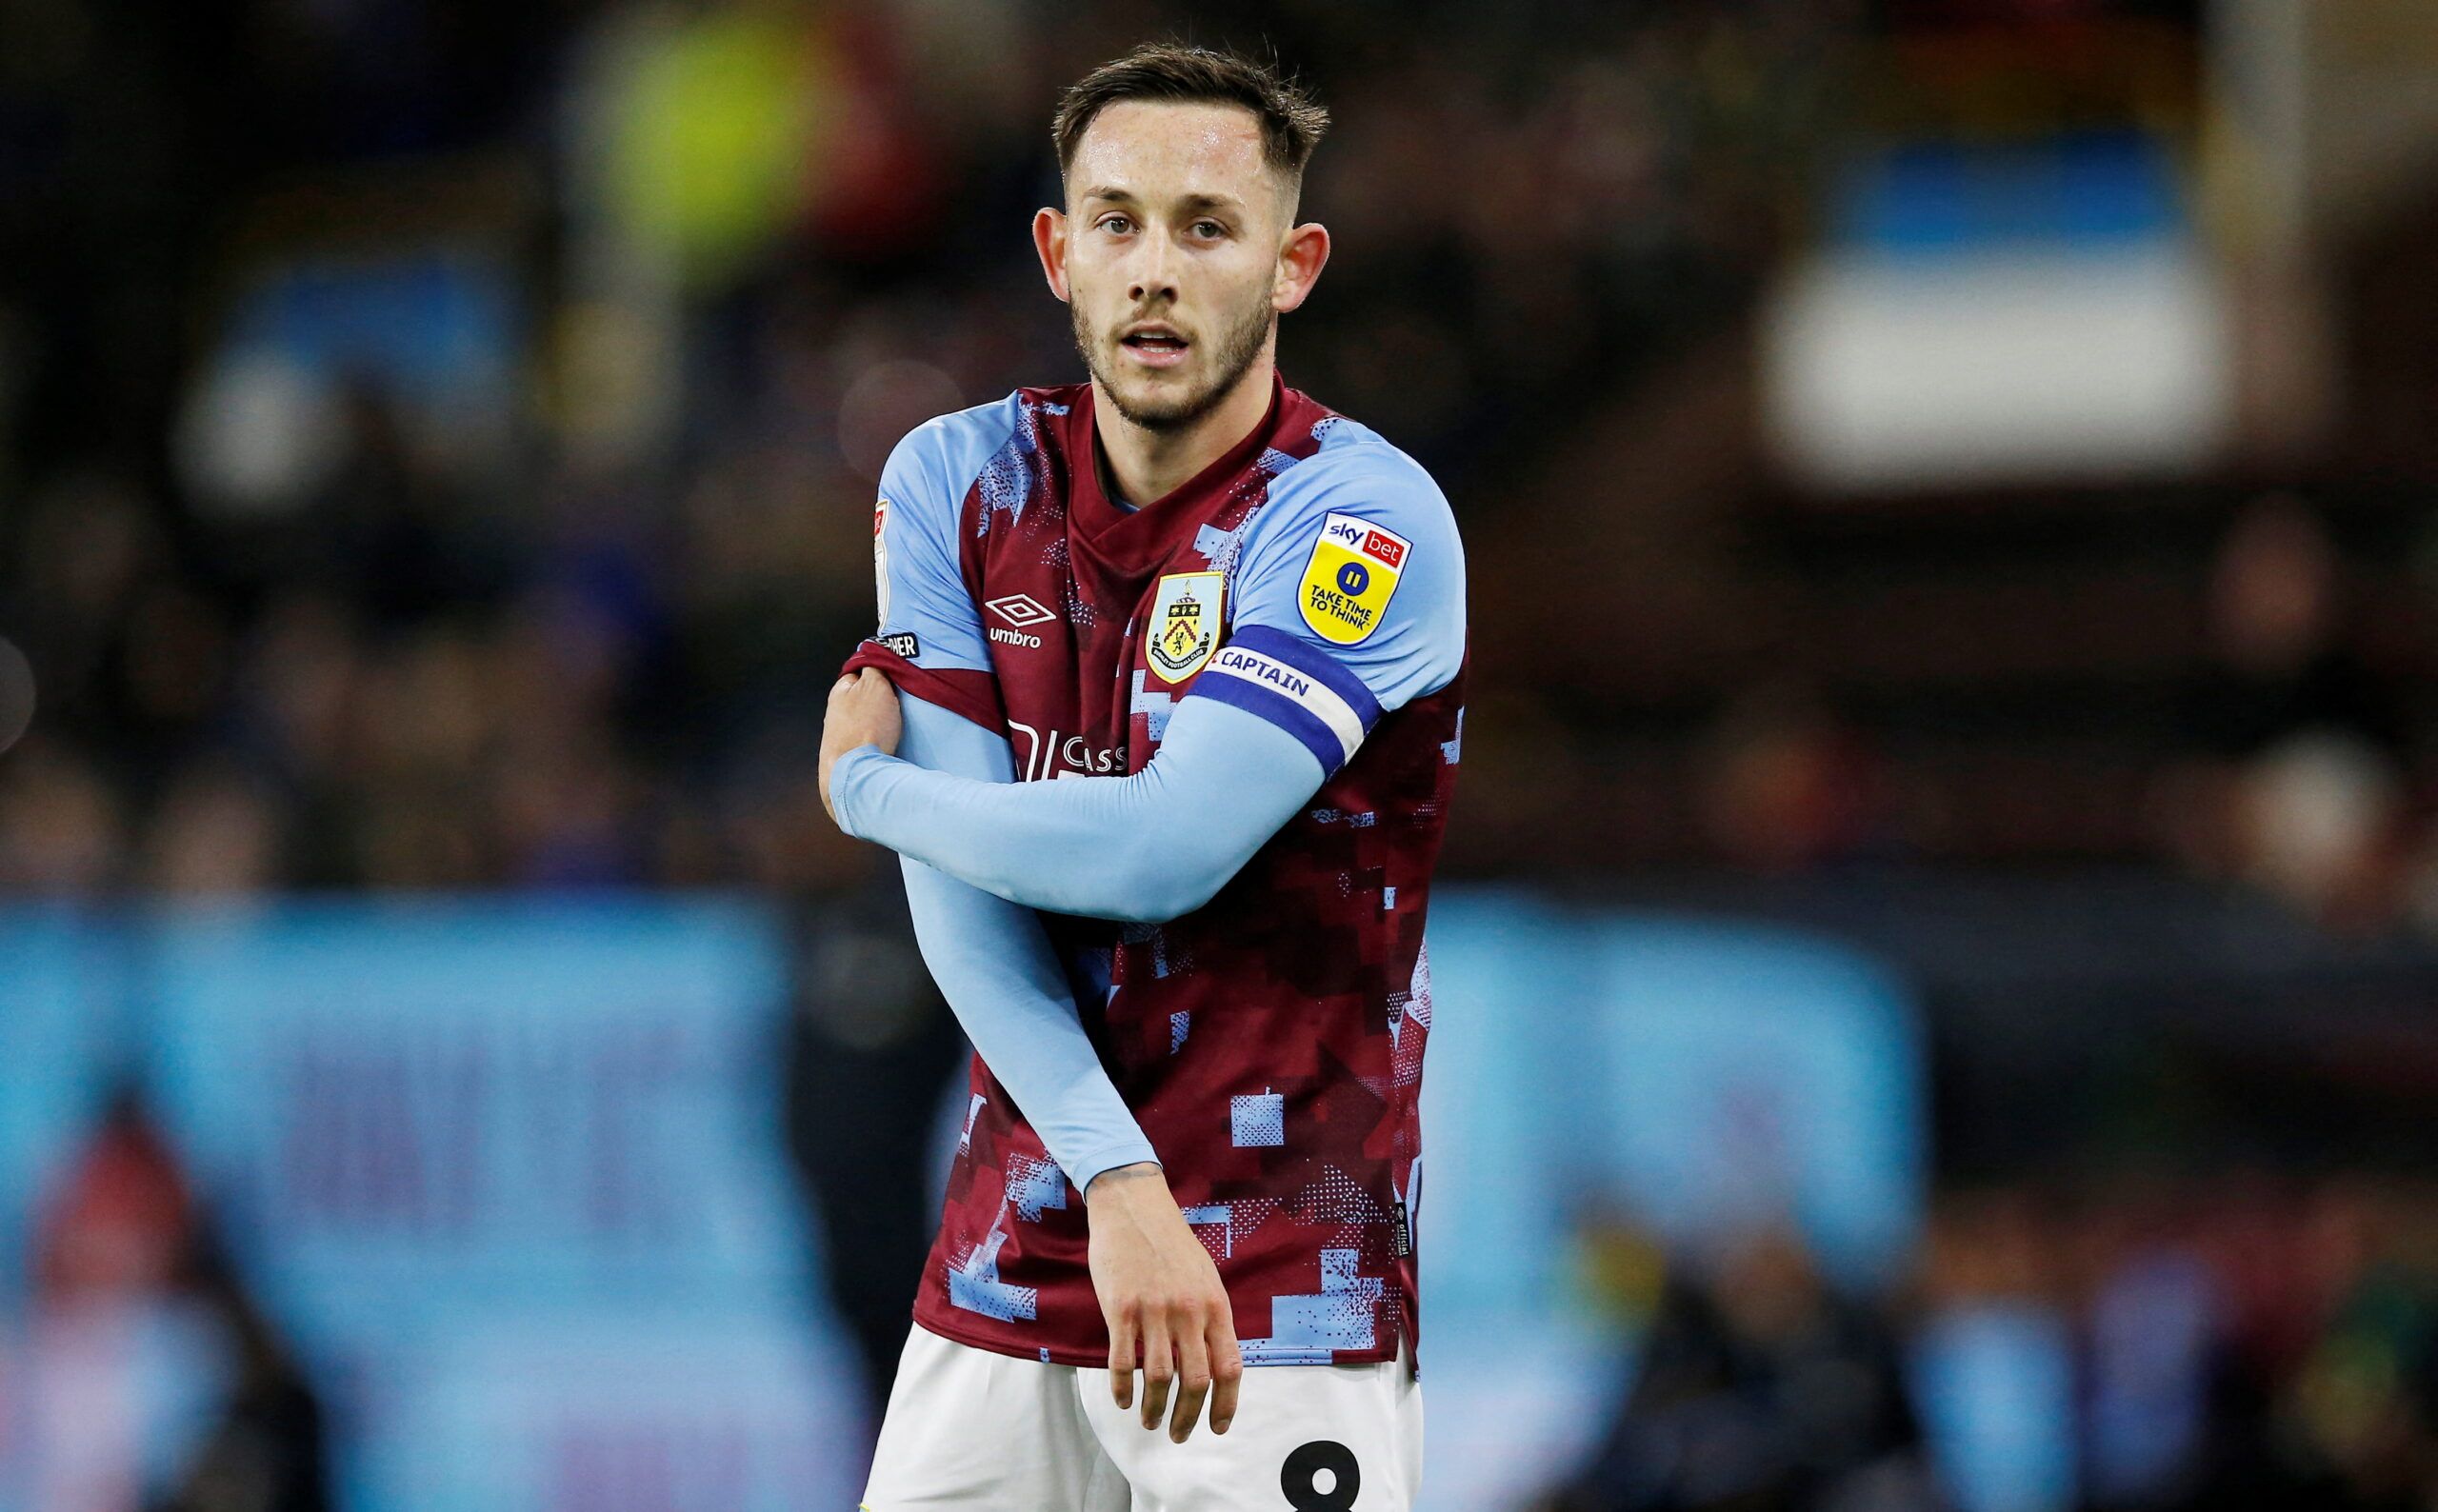 Soccer Football - Carabao Cup Third Round - Burnley v Crawley Town - Turf Moor, Burnley, Britain - November 8, 2022 Burnley's Josh Brownhill reacts after the match   Action Images/Craig Brough  EDITORIAL USE ONLY. No use with unauthorized audio, video, data, fixture lists, club/league logos or 